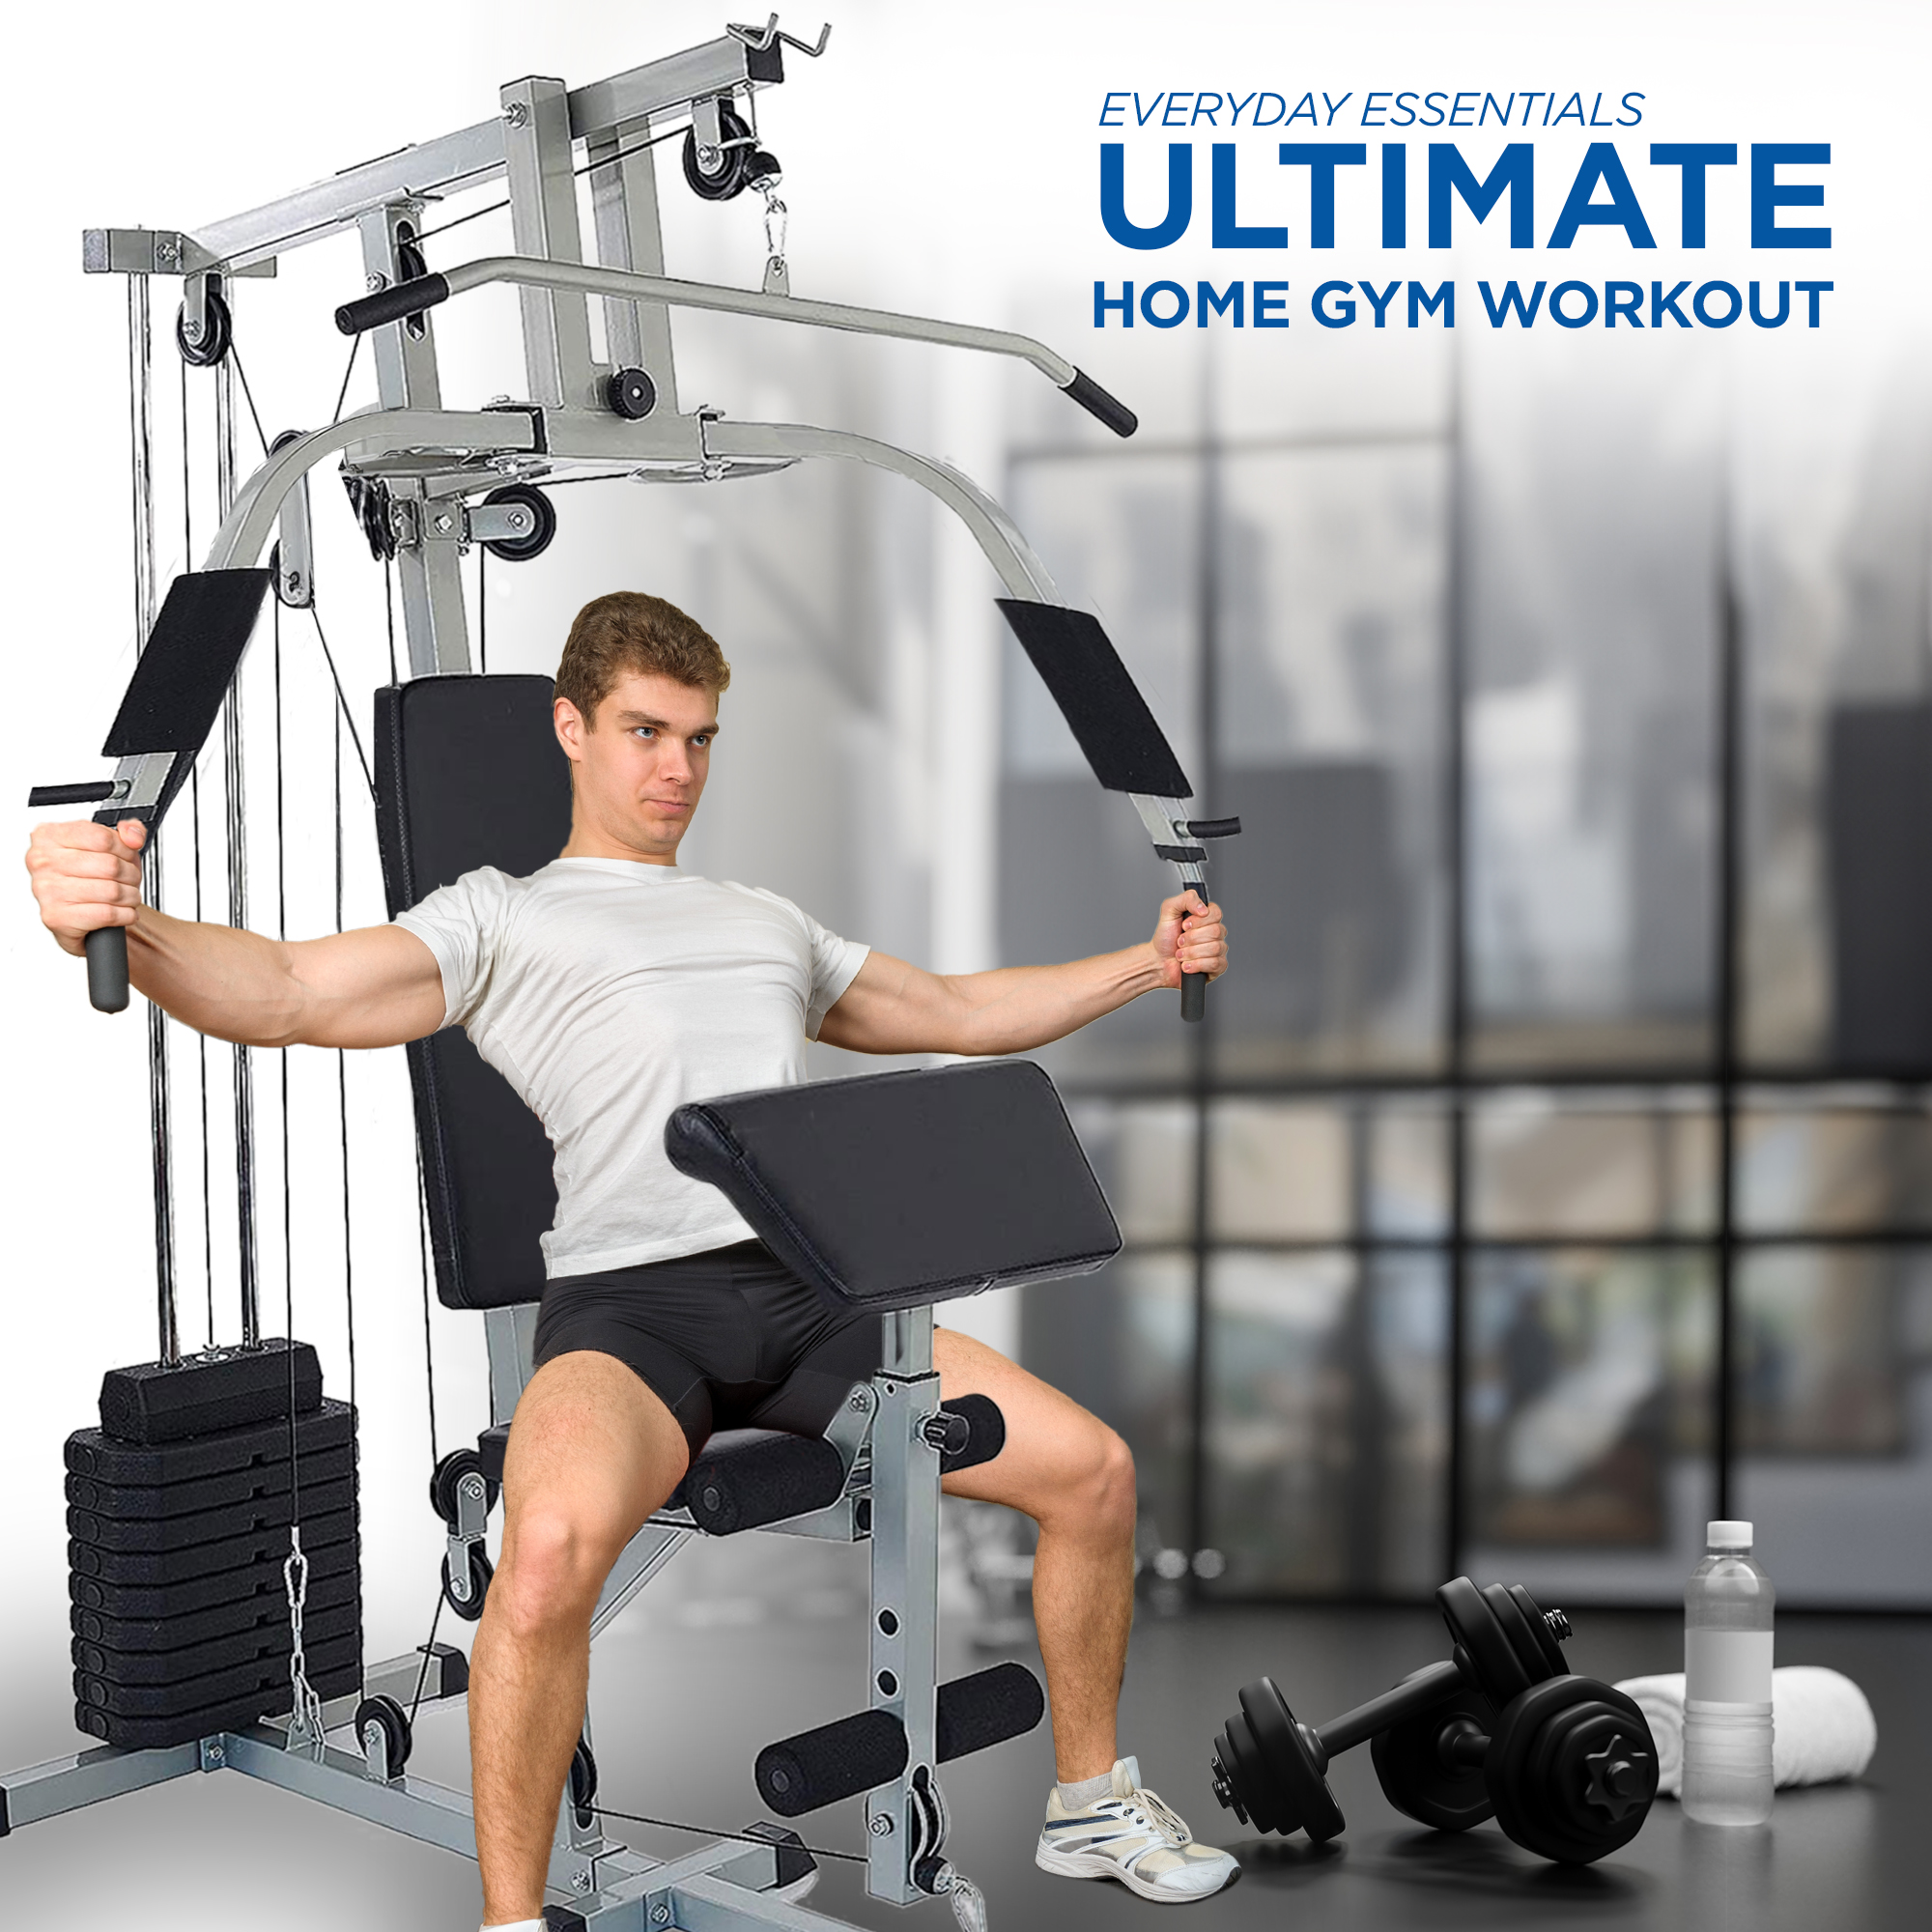 Everyday Essentials Home Gym Exercise Equipment Bench Strength Workout Station - image 5 of 10